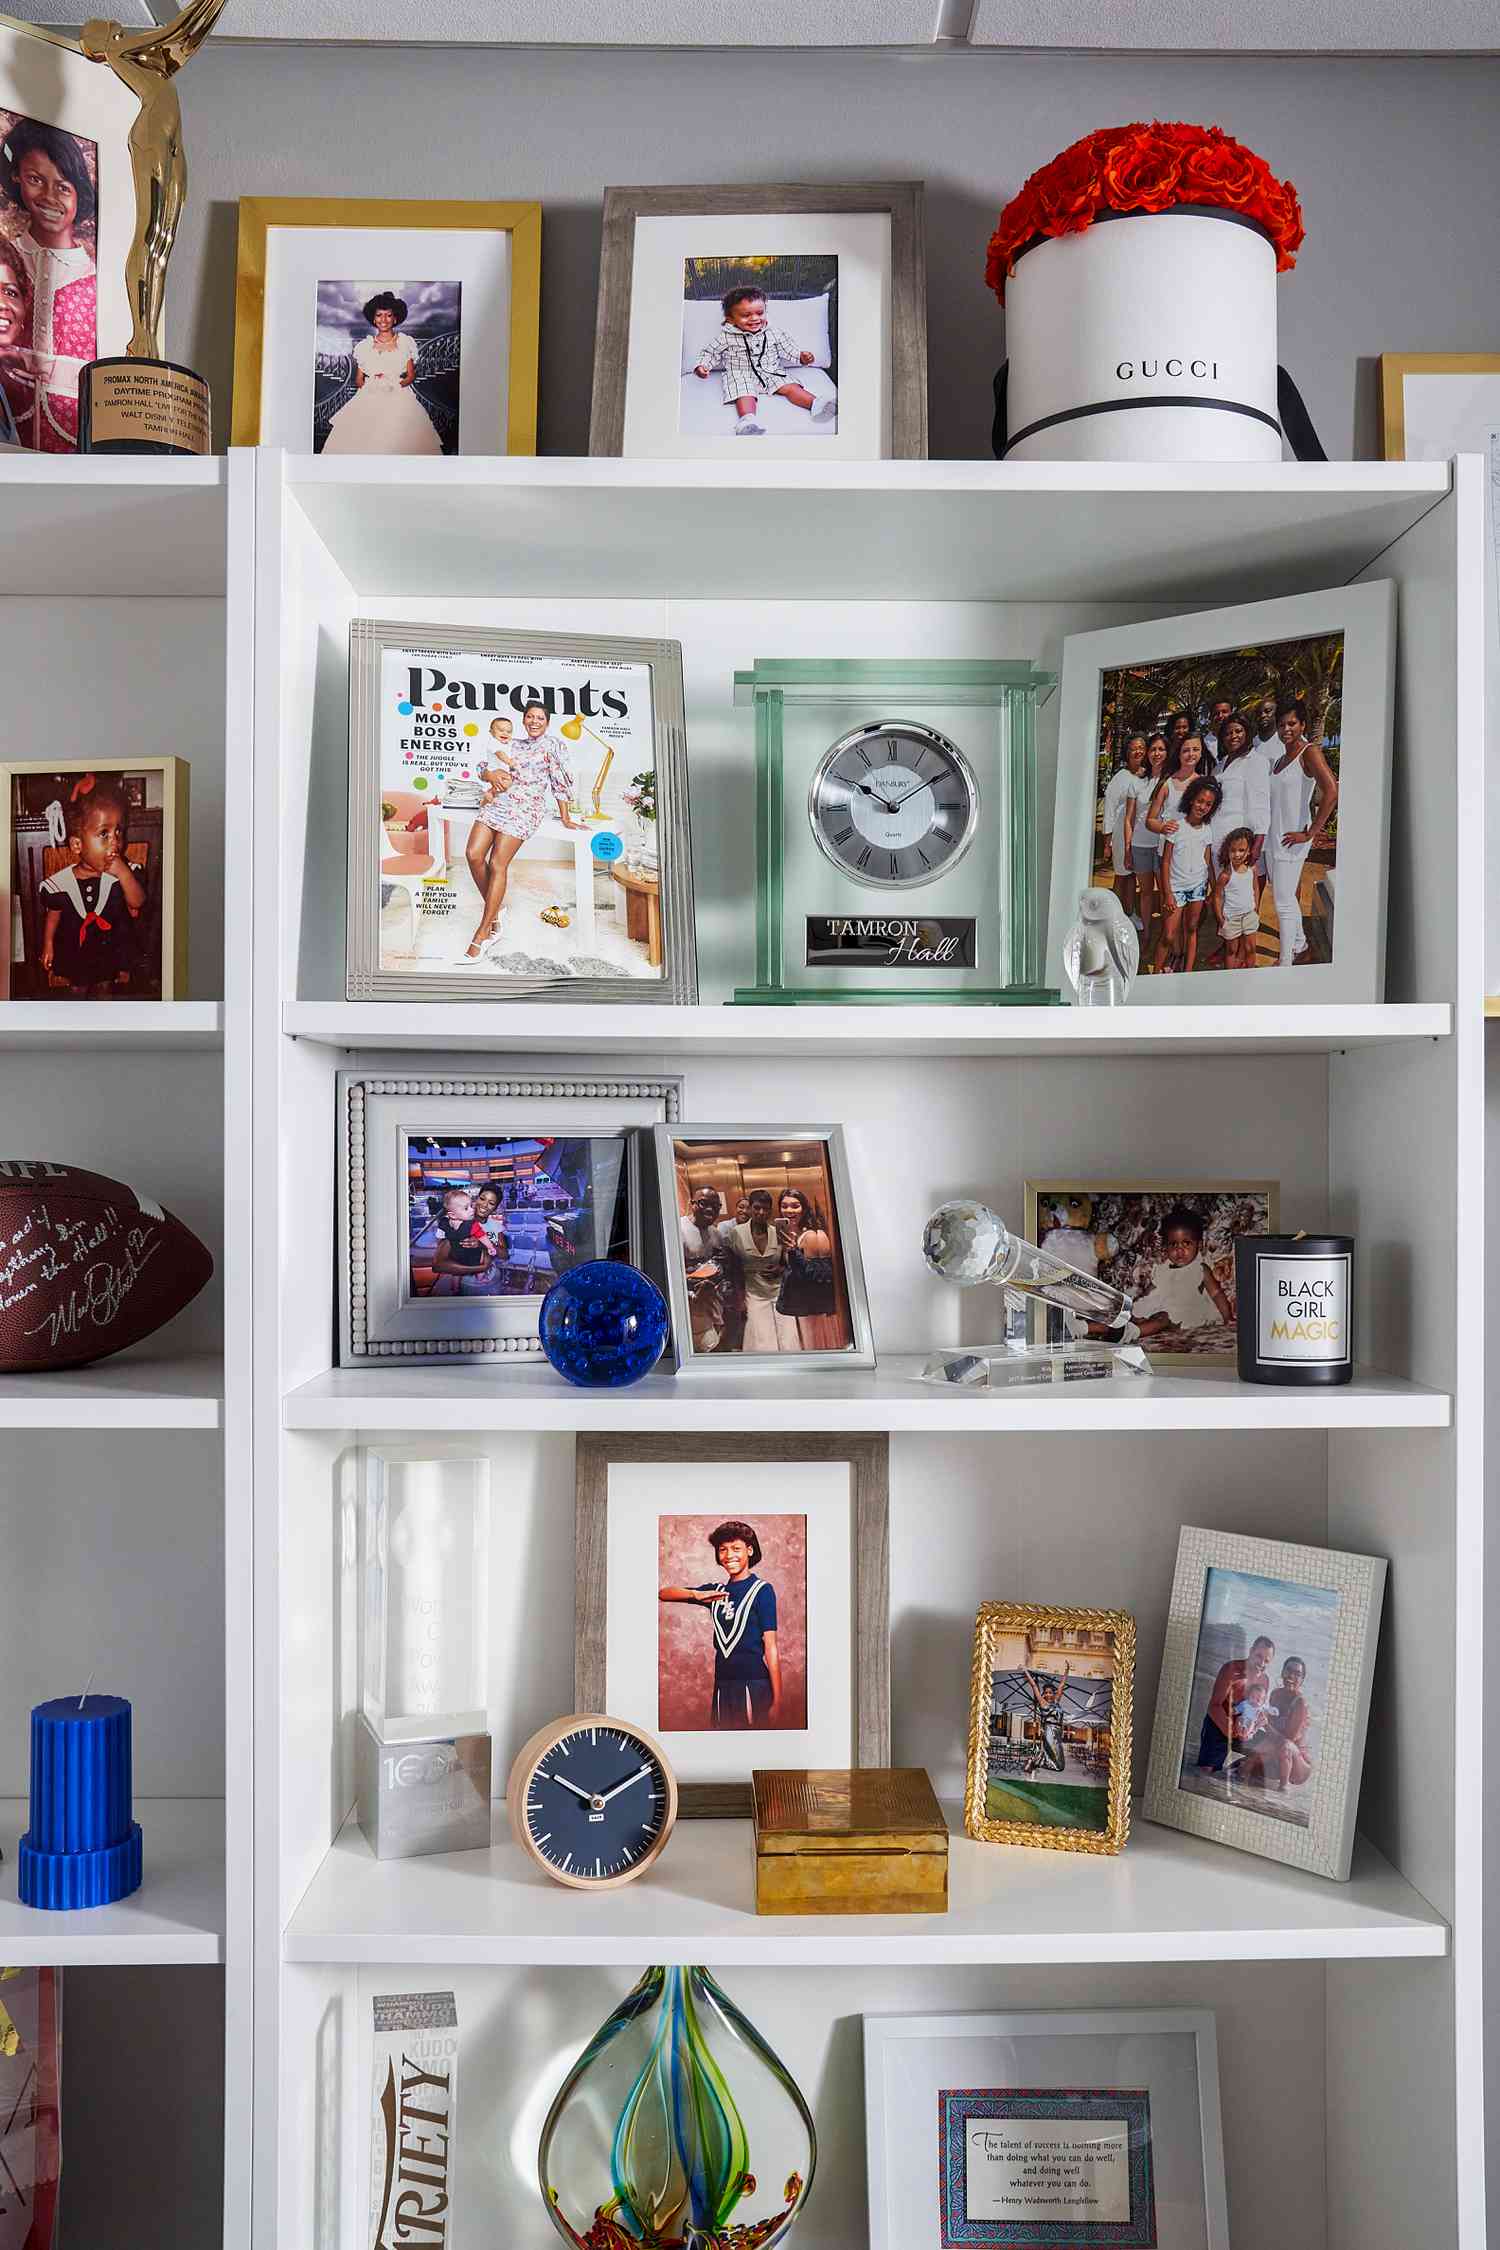 Tamron Hall's dressing room shelves with photos